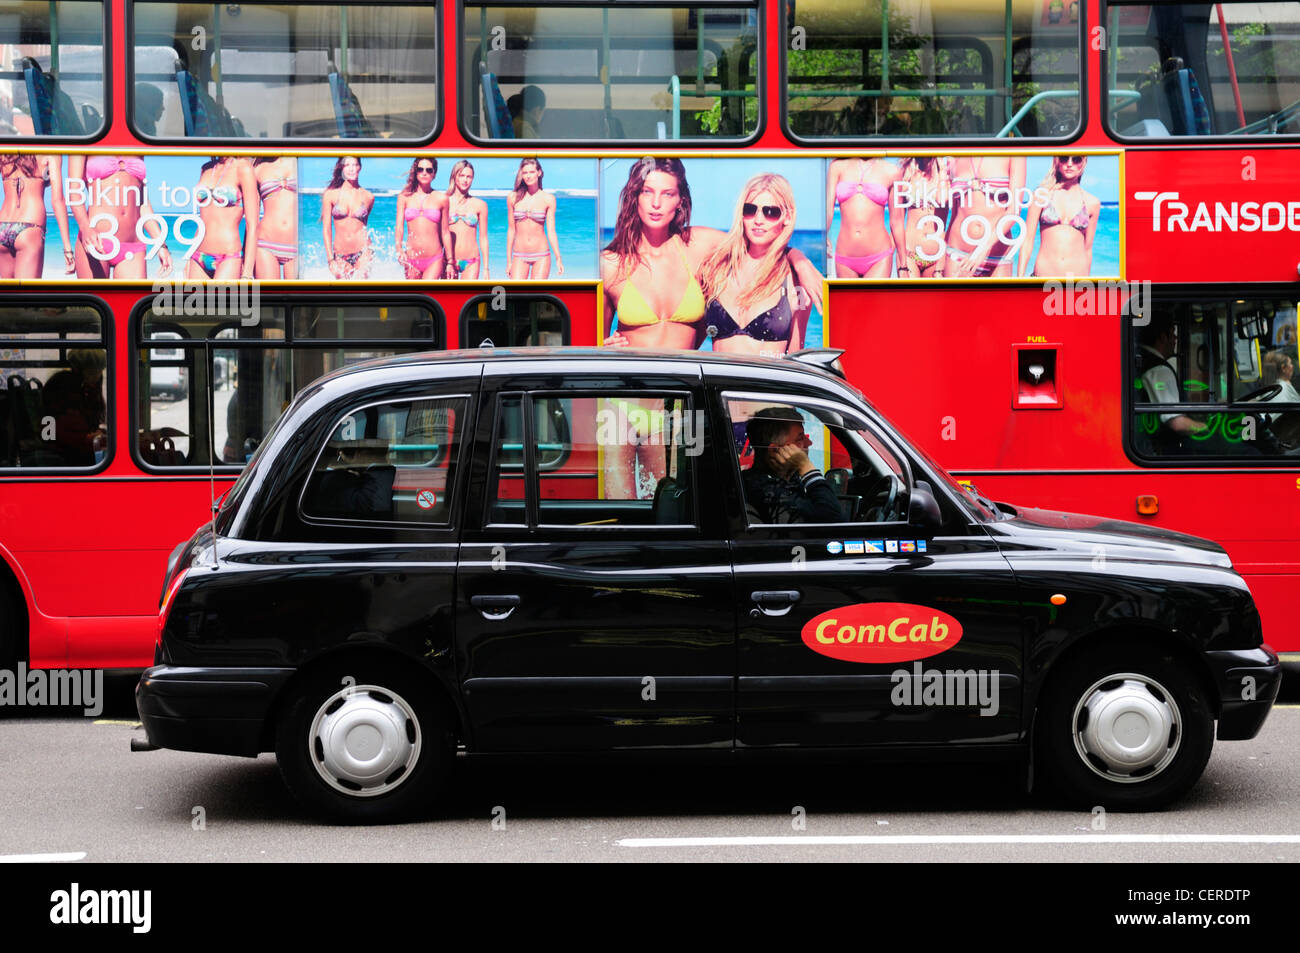 ComCab London Taxi and red double decker bus in Oxford Street. Stock Photo